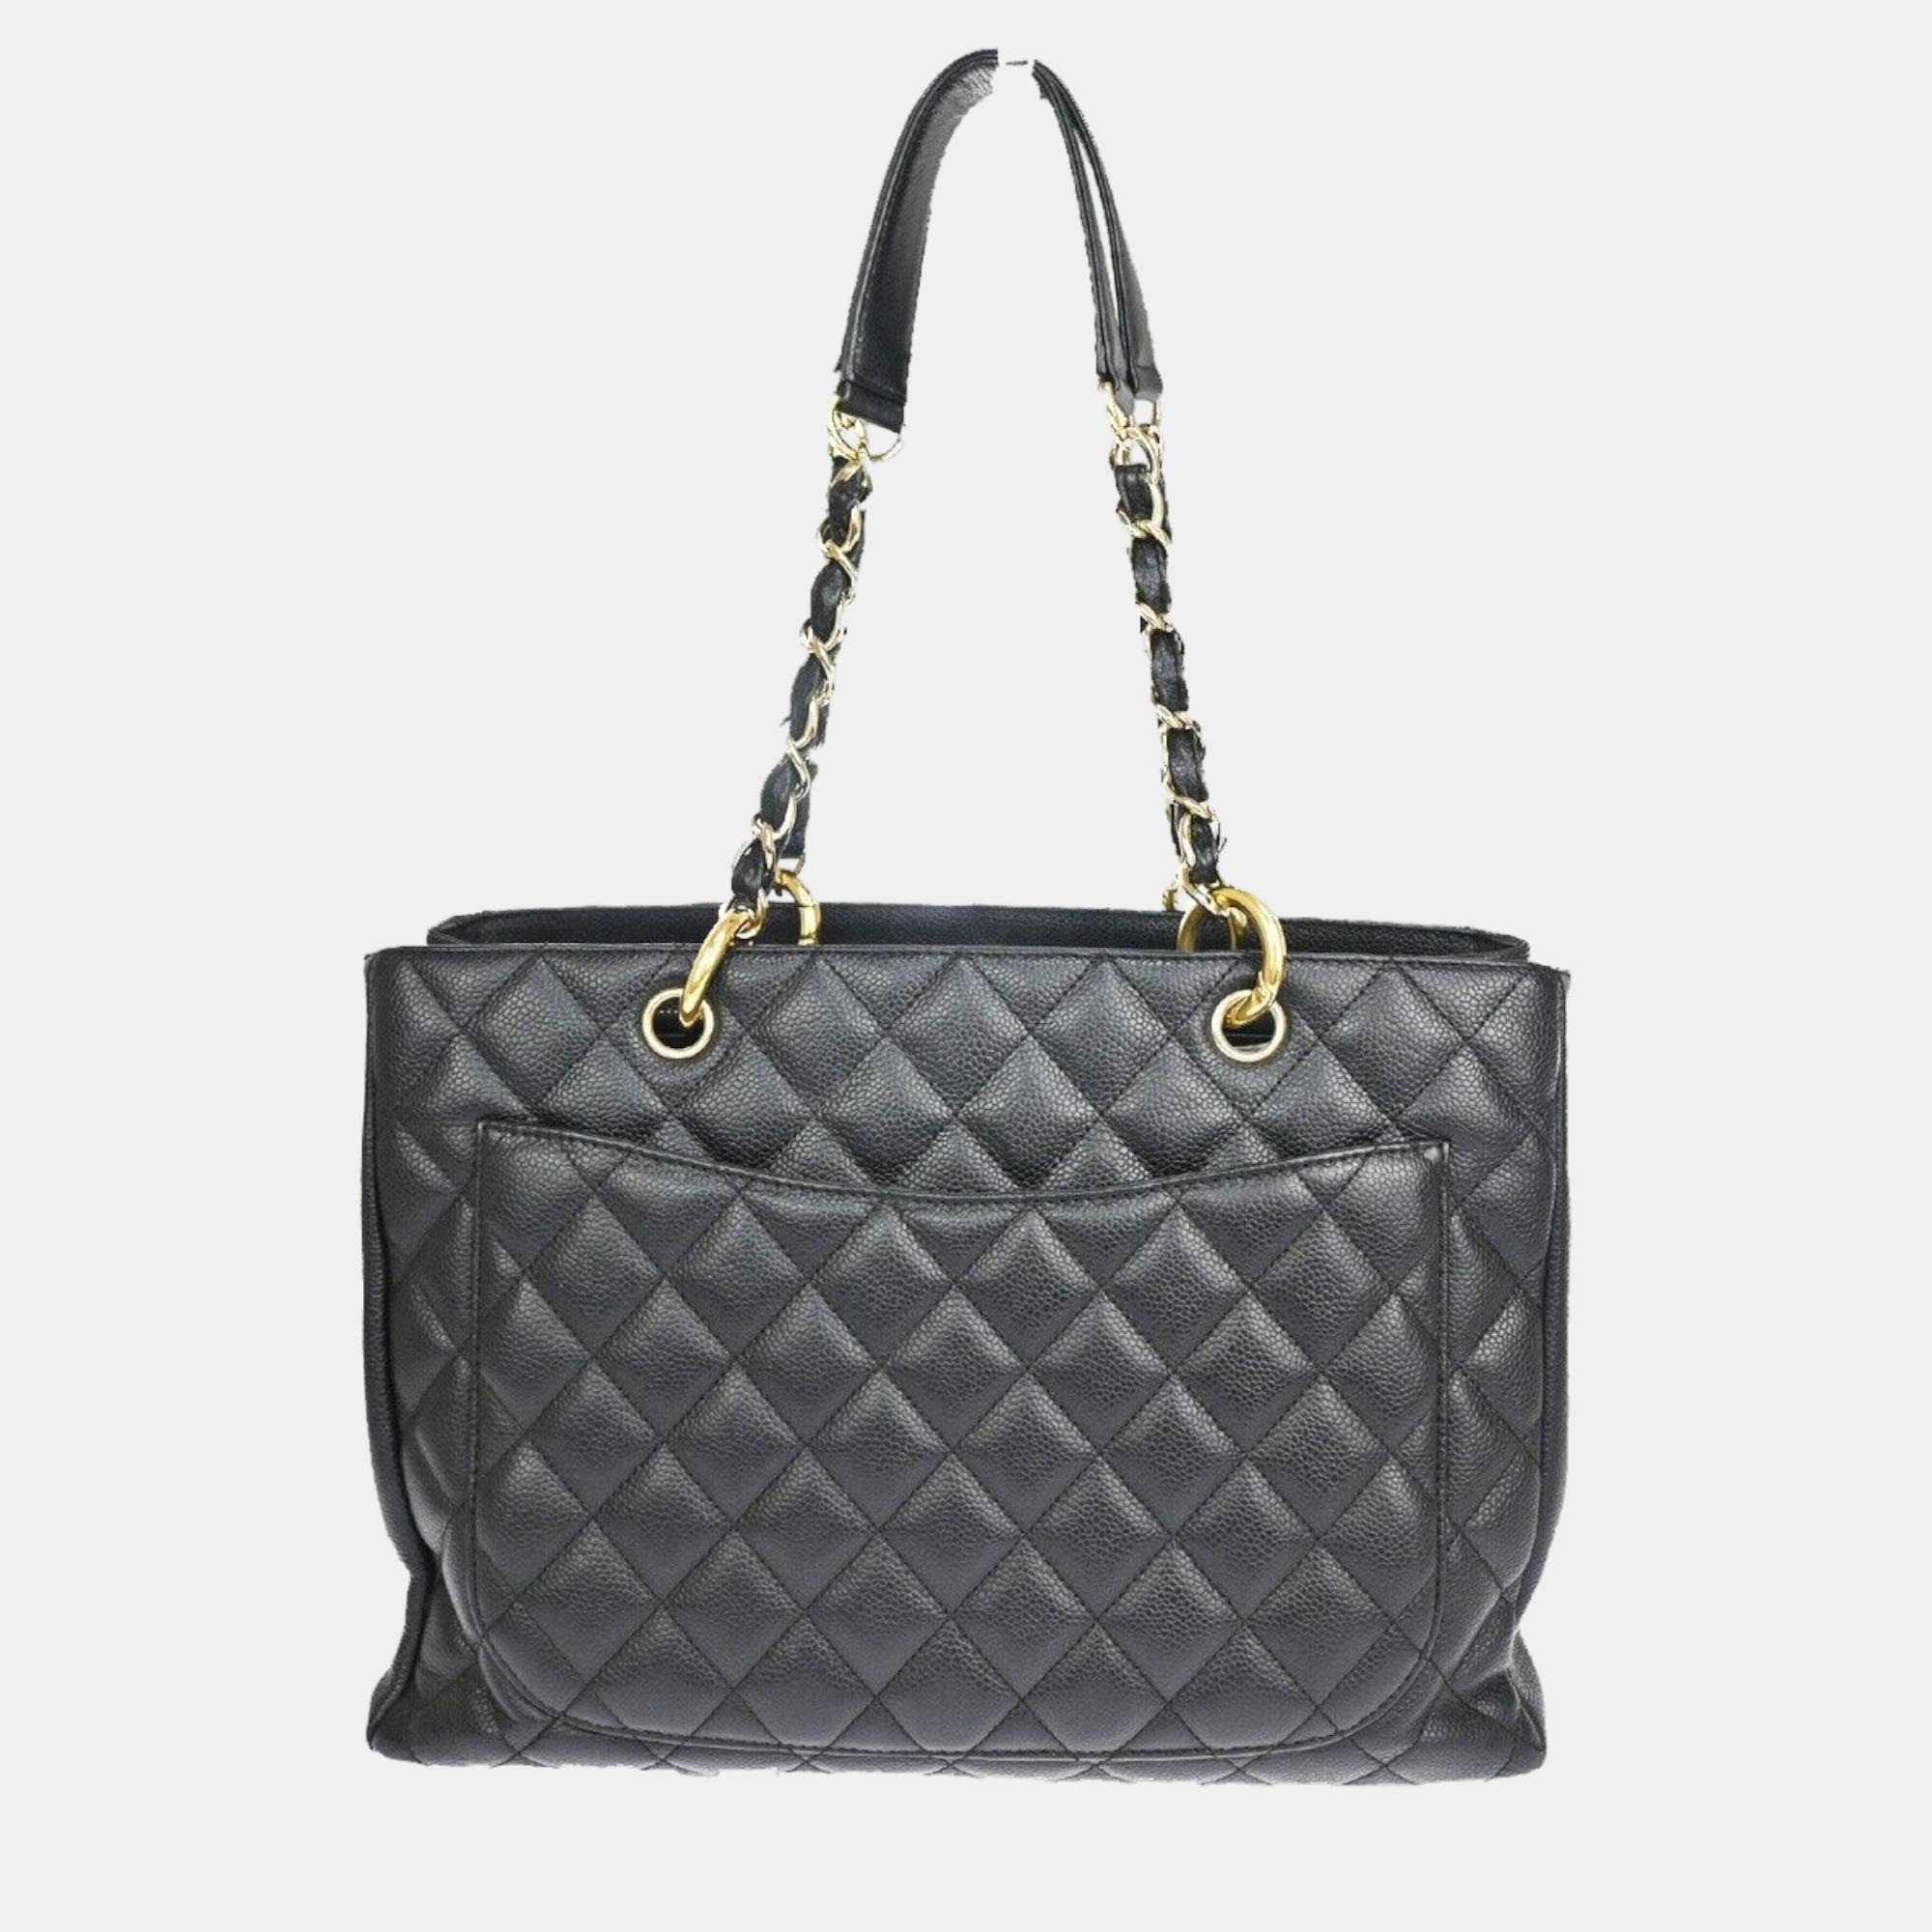 Chanel Black Leather GST (Grand shopping Tote) tote bag Chanel